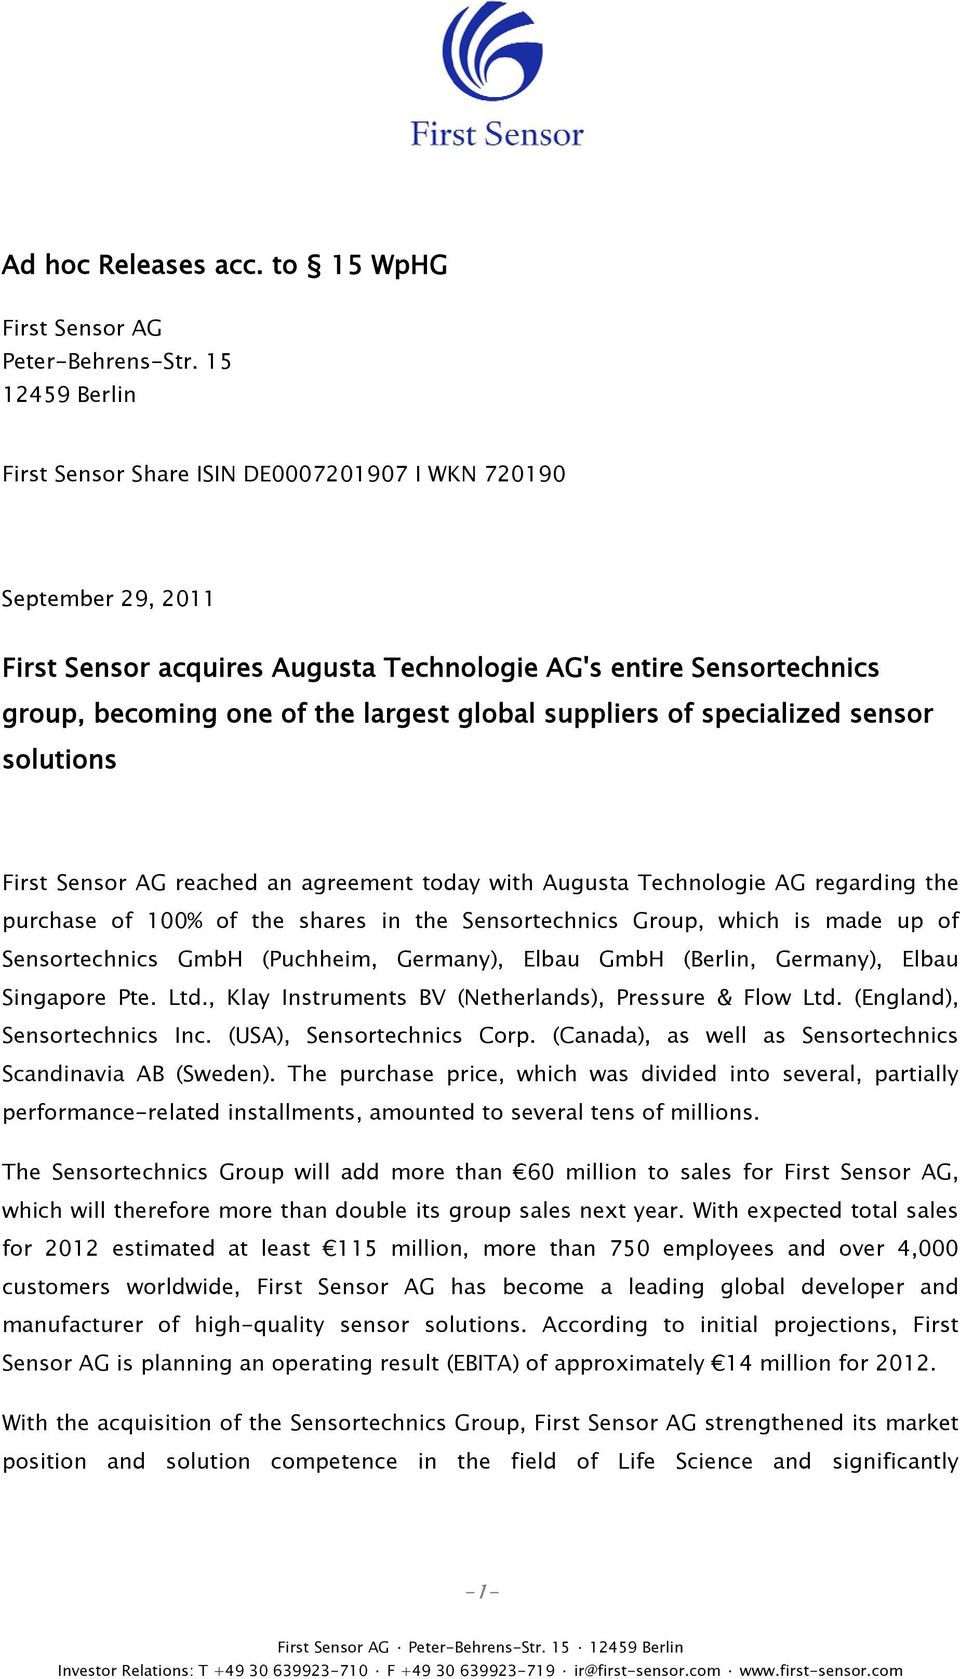 suppliers of specialized sensor solutions reached an agreement today with Augusta Technologie AG regarding the purchase of 100% of the shares in the Sensortechnics Group, which is made up of